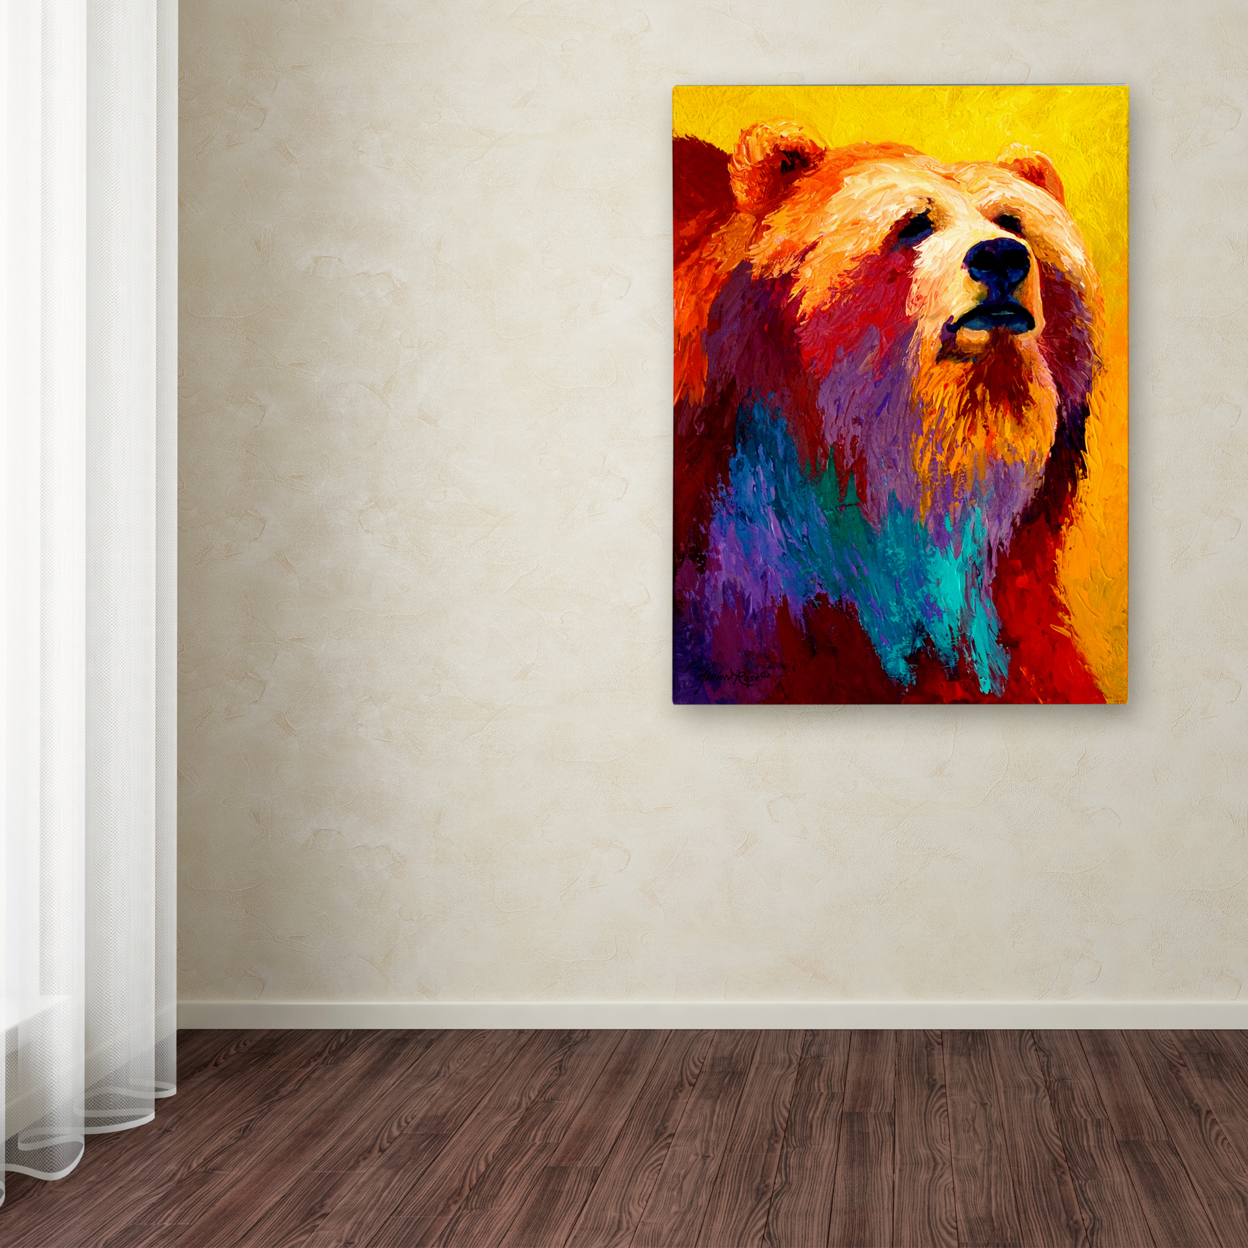 Marion Rose 'Ab Grizz III' Ready To Hang Canvas Art 14 X 19 Inches Made In USA